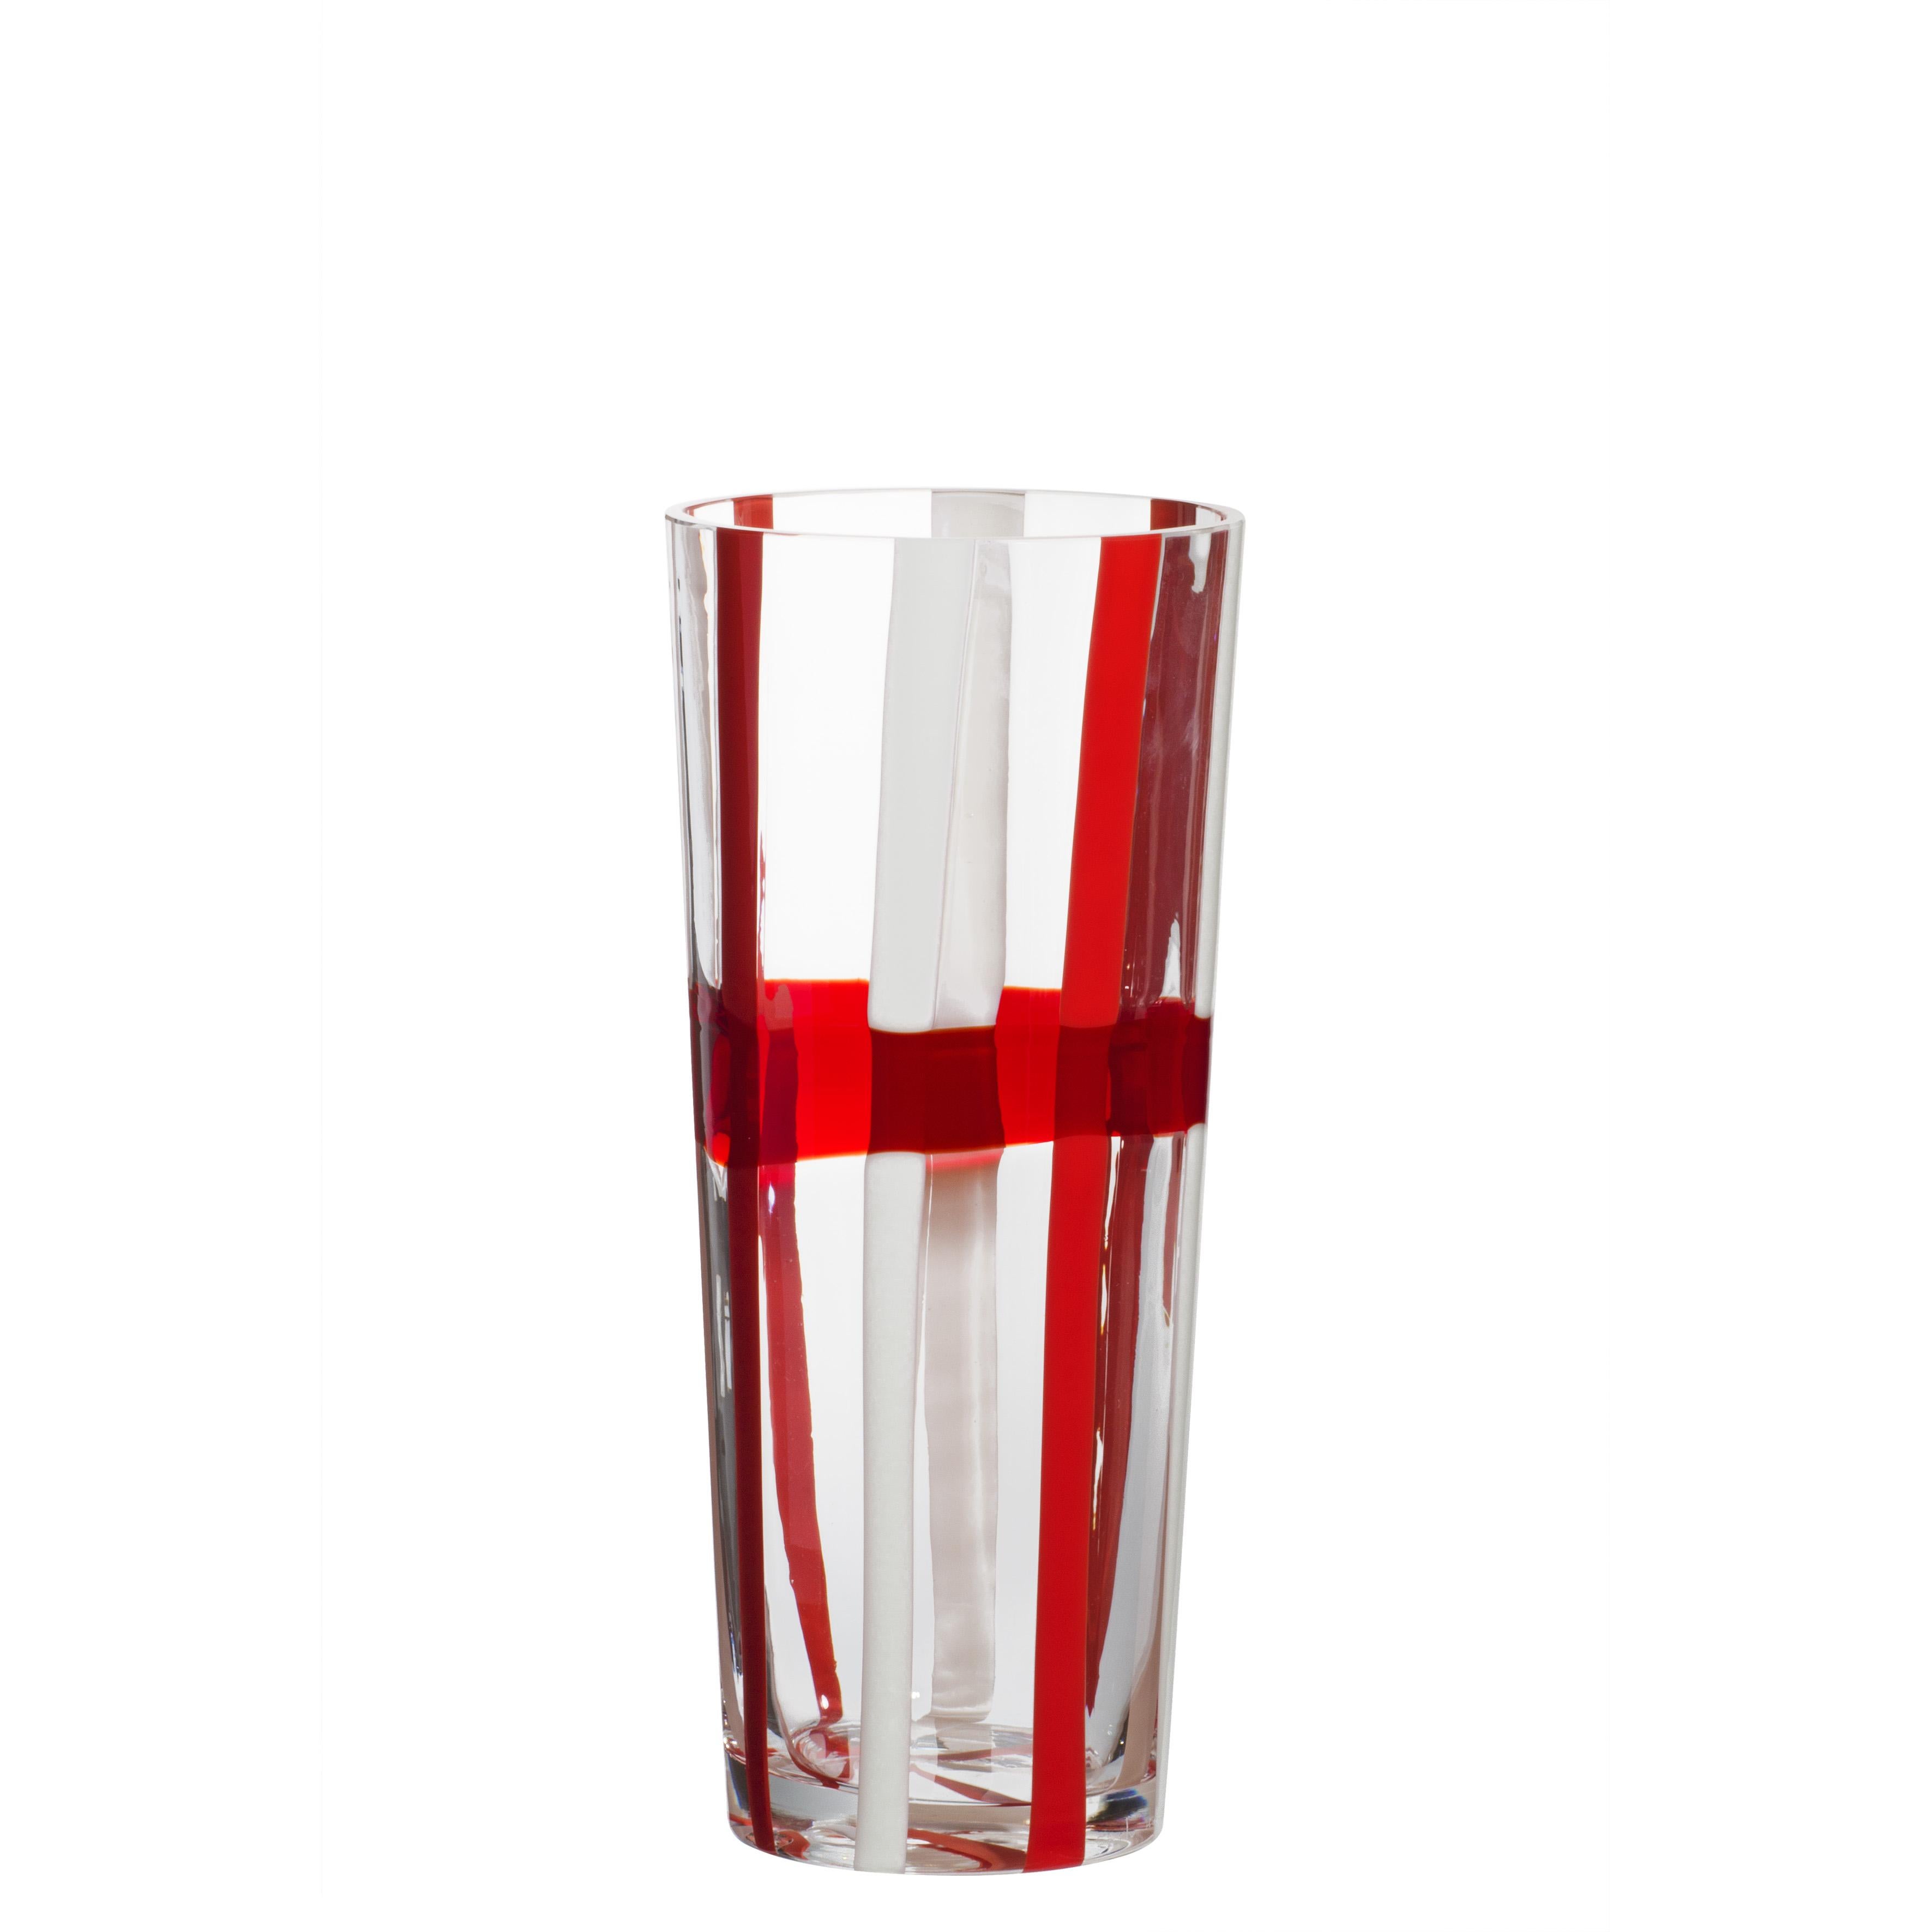 Small Troncocono Vase in Red and White by Carlo Moretti For Sale